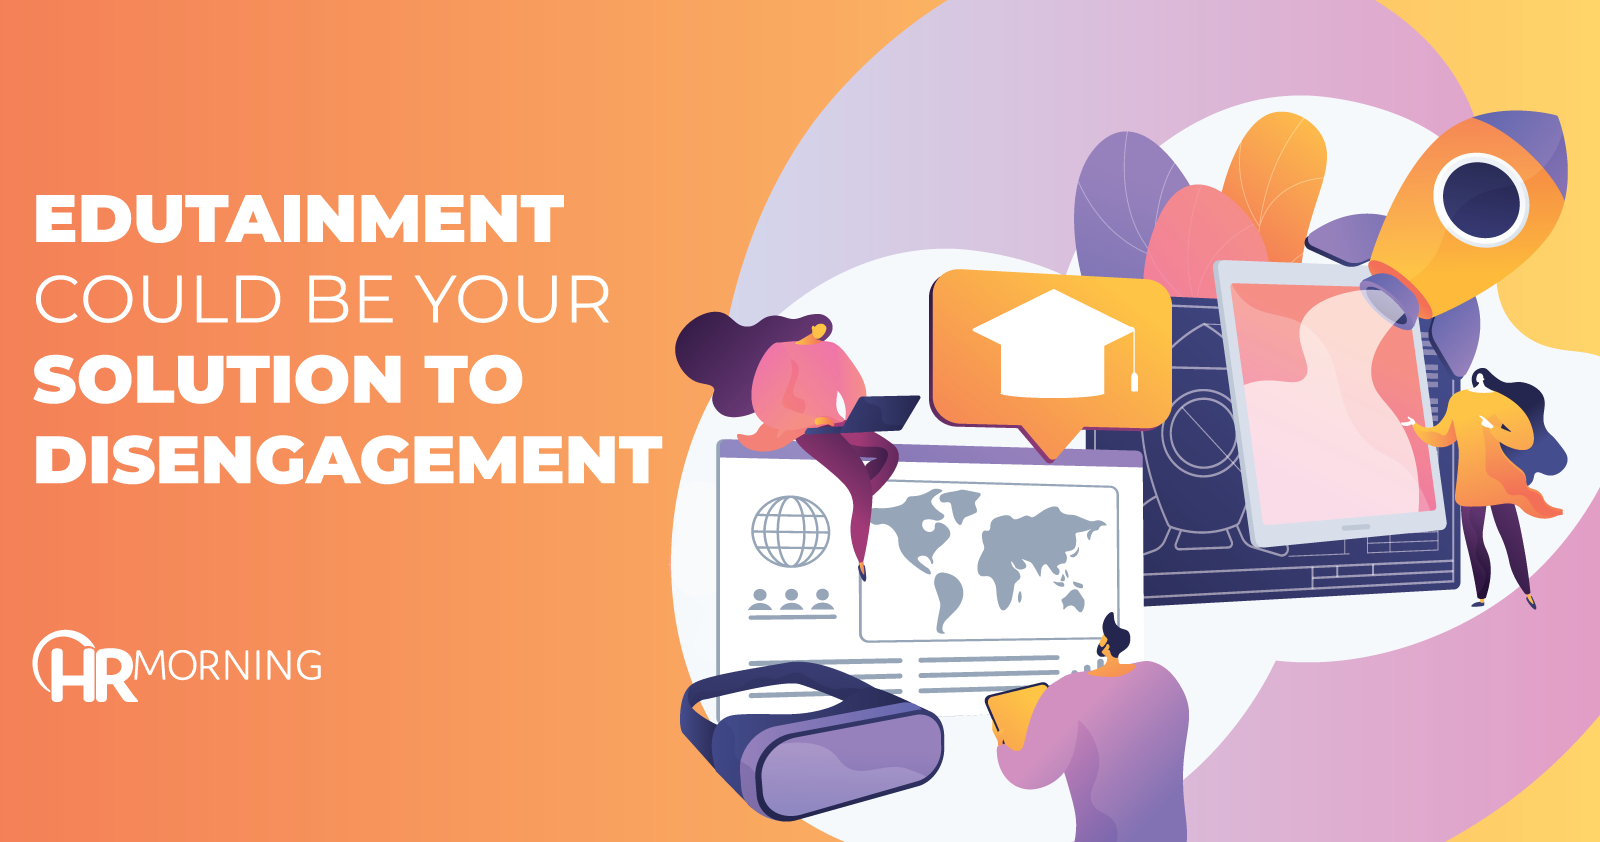 Edutainment could be your solution to disengagement